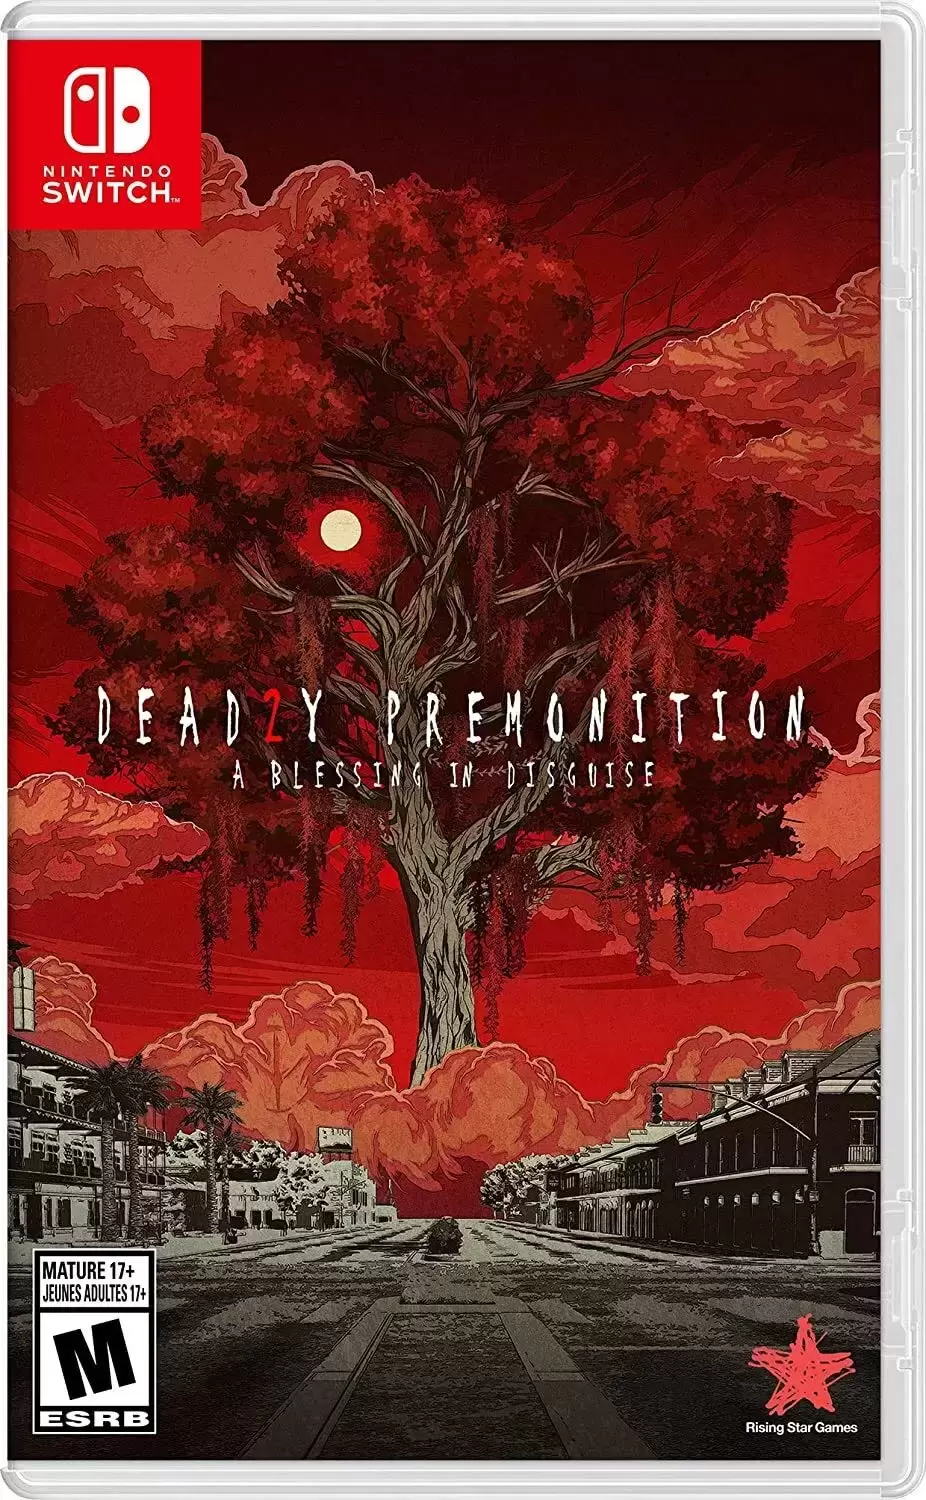 Nintendo Switch Games - Deadly Premonition 2 : A Blessing In Disguise